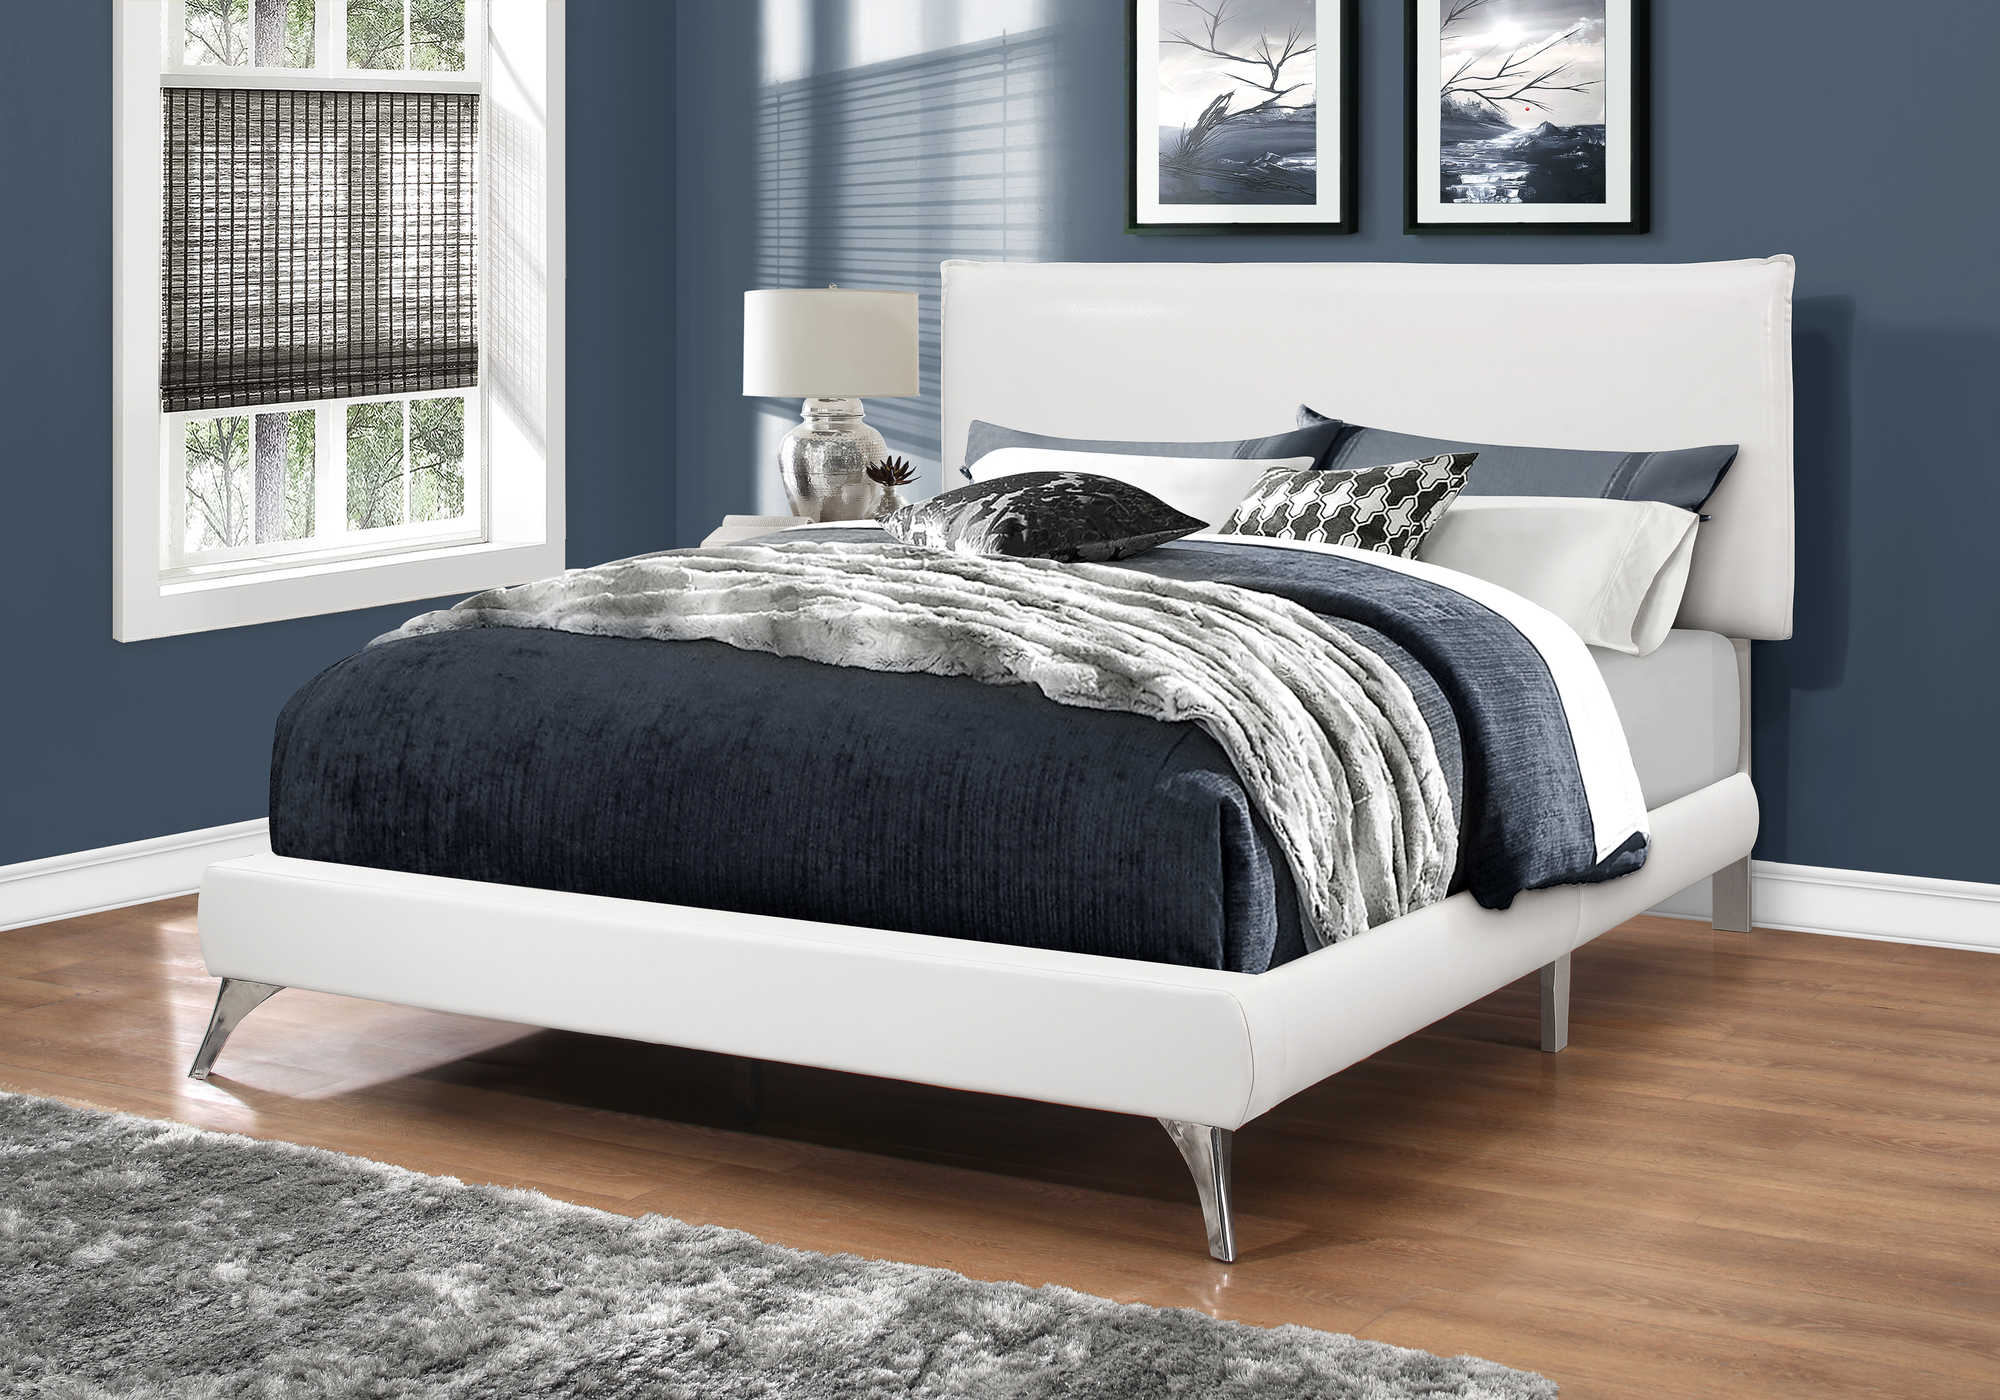 BED - QUEEN SIZE / WHITE LEATHER-LOOK WITH CHROME LEGS